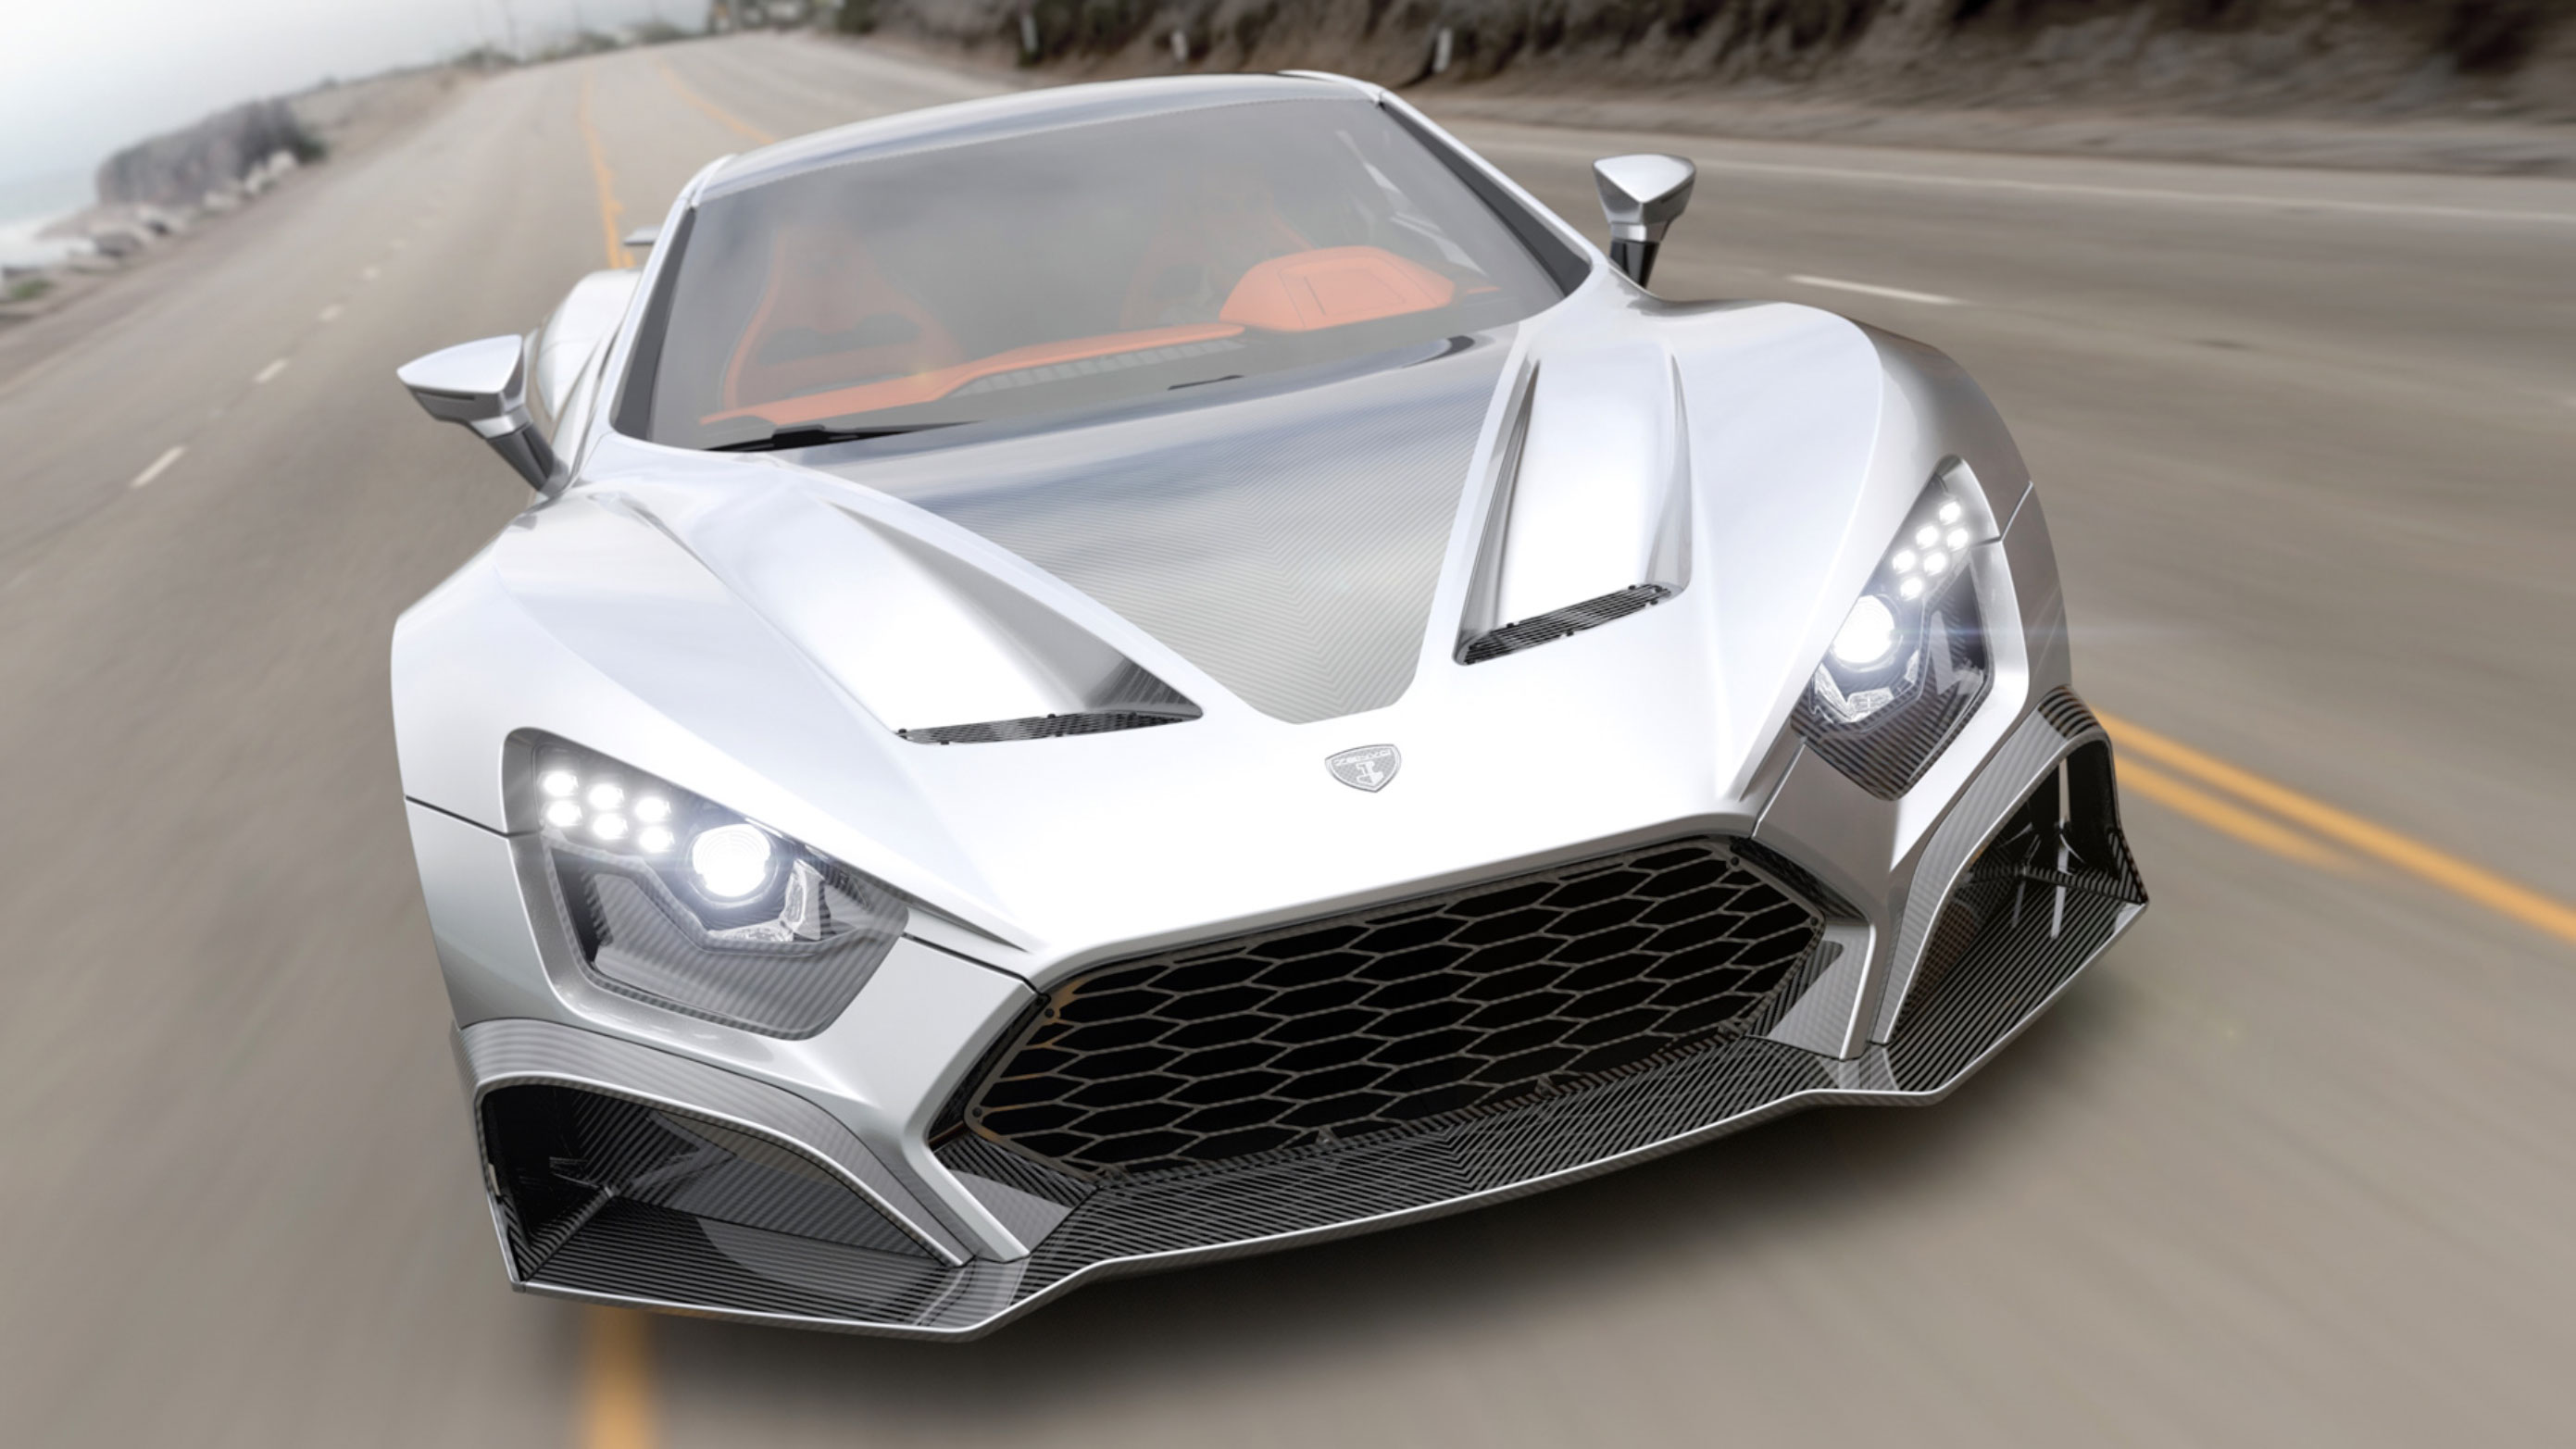 Zenvo Tsr Gt Ends The Tsr Range With A 263 Mph Top Speed Autoblog